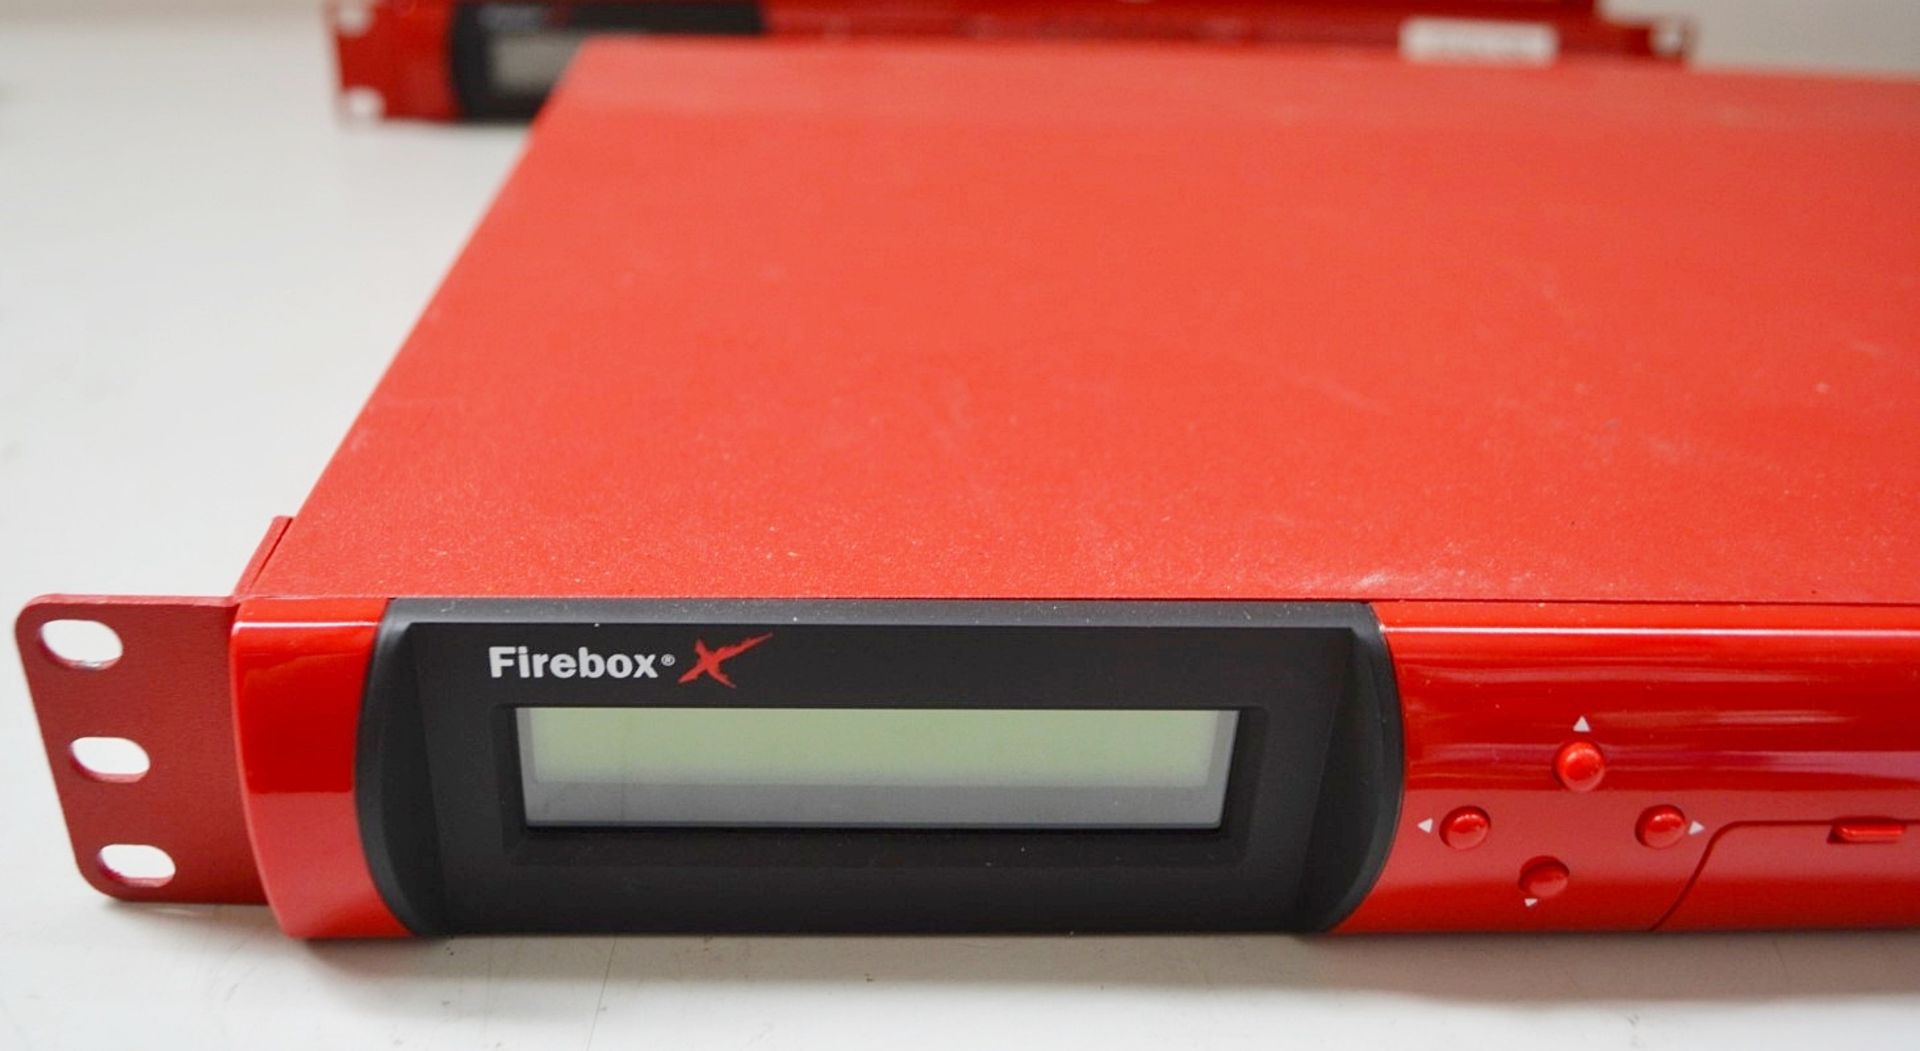 3 x Red Watchguard Firebox Security System's - Ref: LD359 - CL409 - Altrincham WA14 - Image 9 of 13